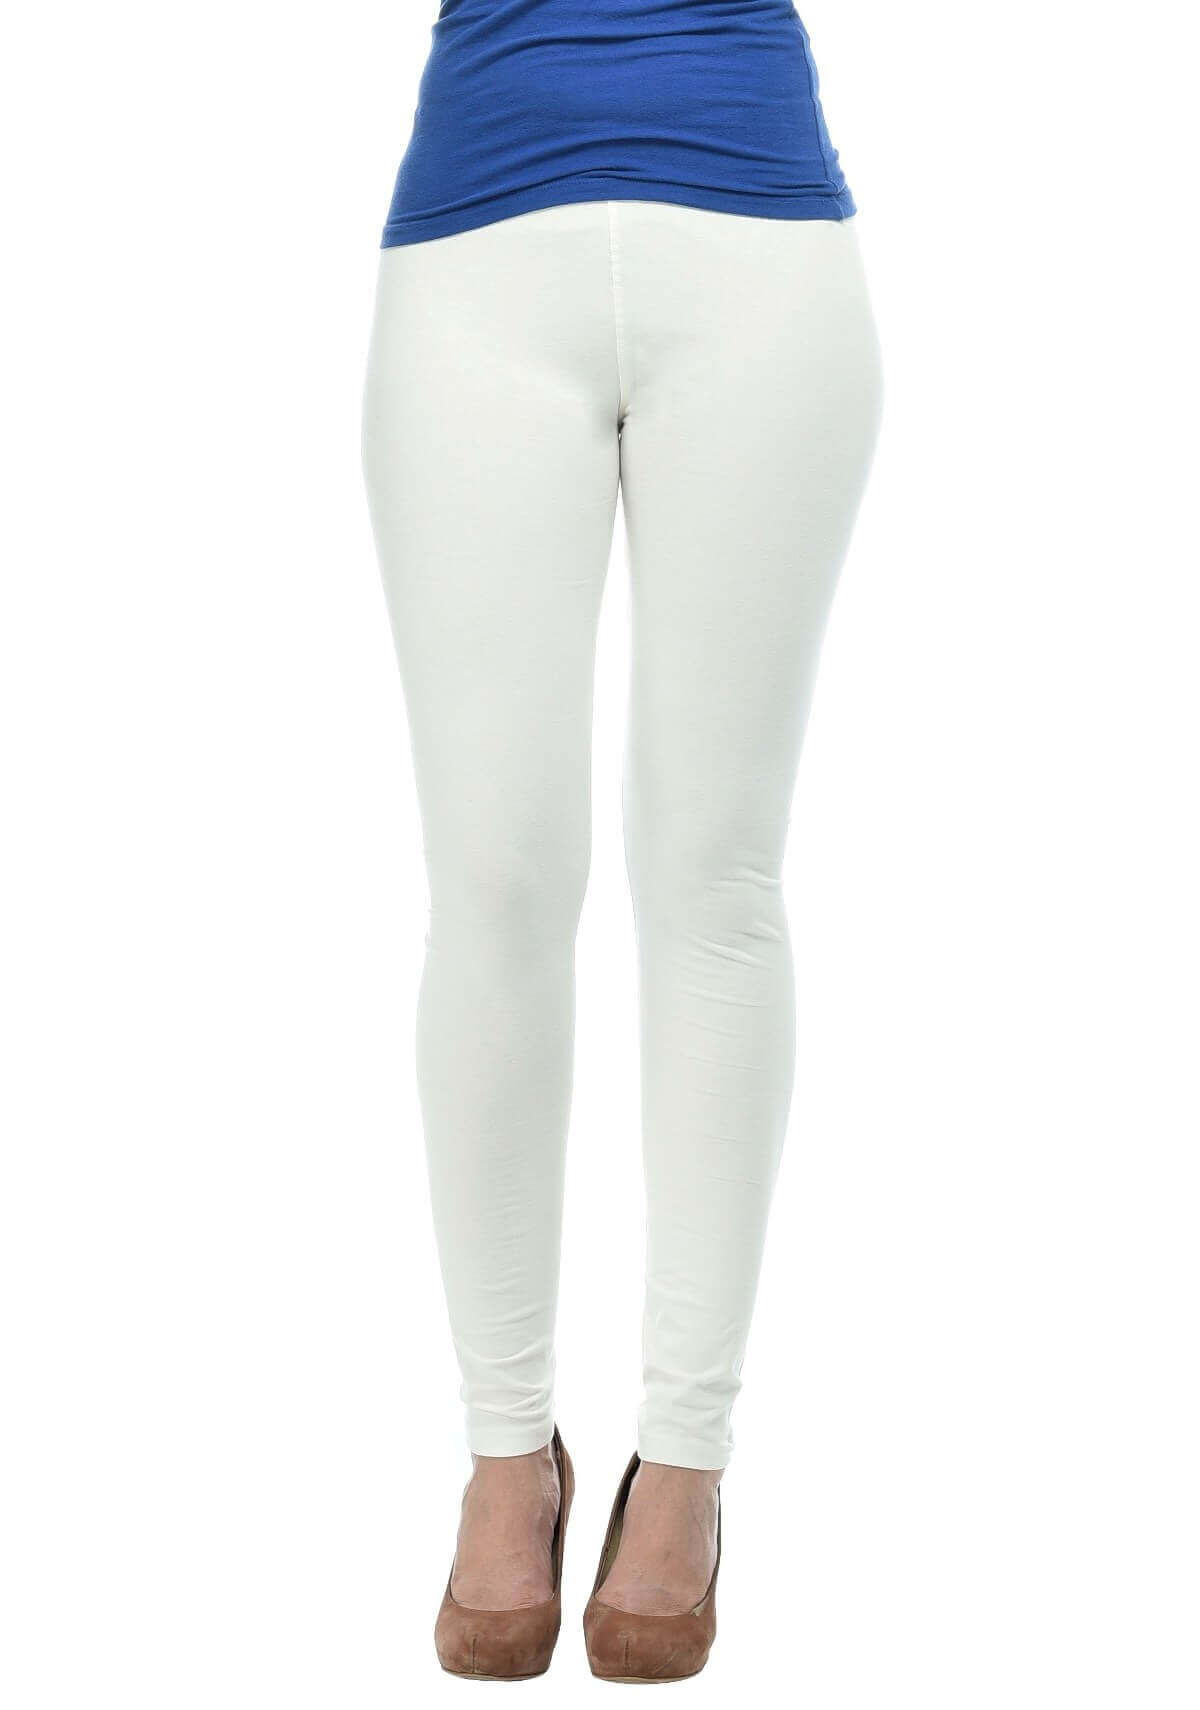 Frenchtrendz  Buy Frenchtrendz Cotton Spandex Dyeable Ankle Leggings  Online India